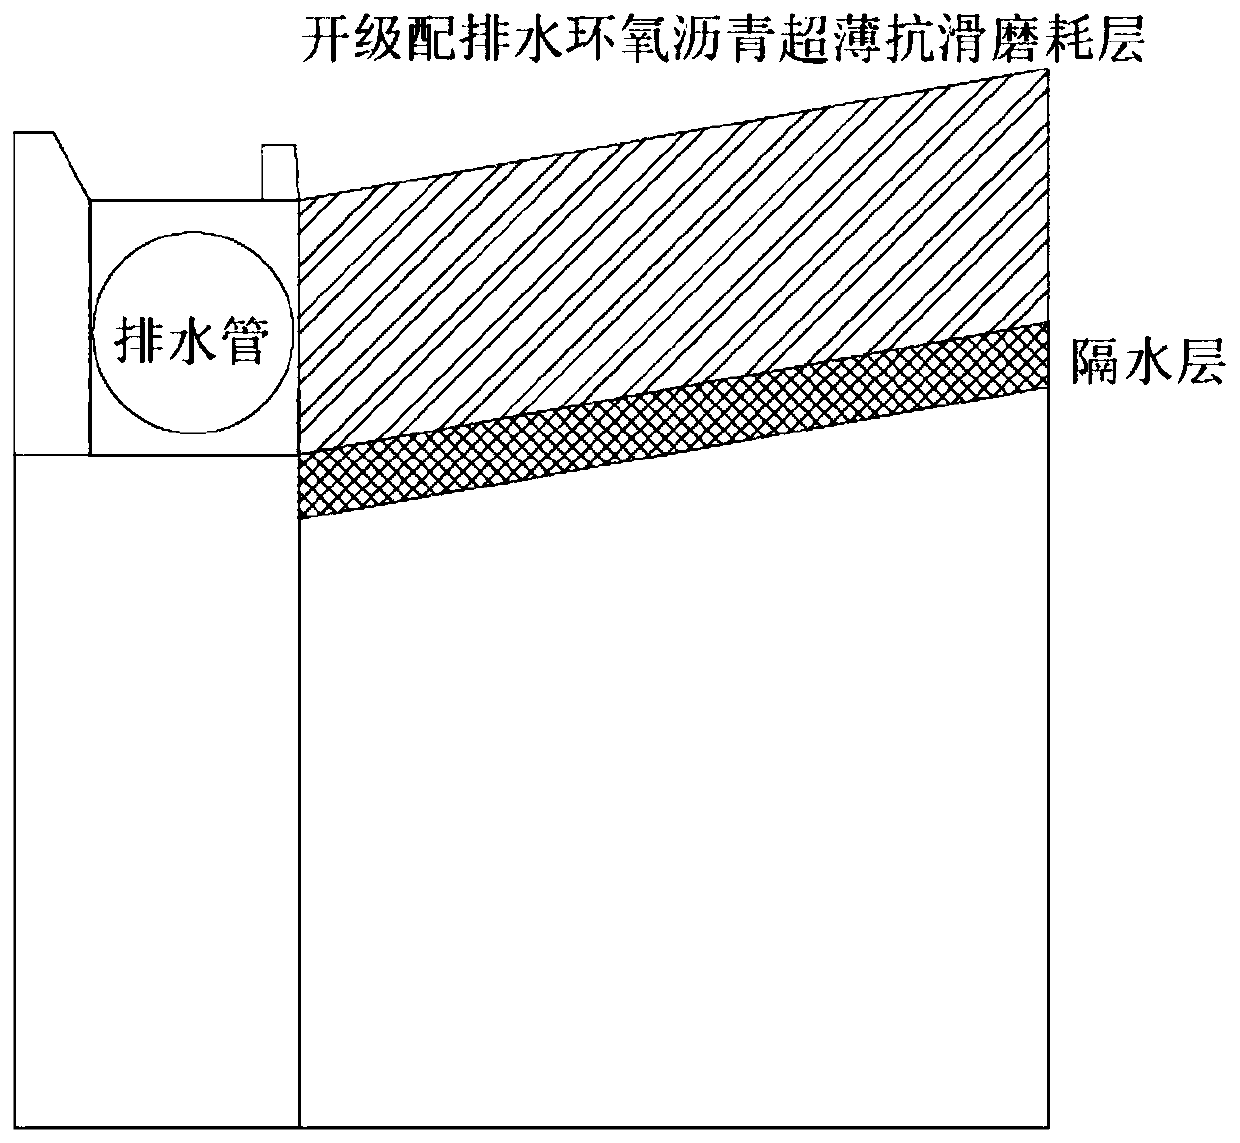 Ultrathin anti-skid wearing layer and pavement with wearing layer